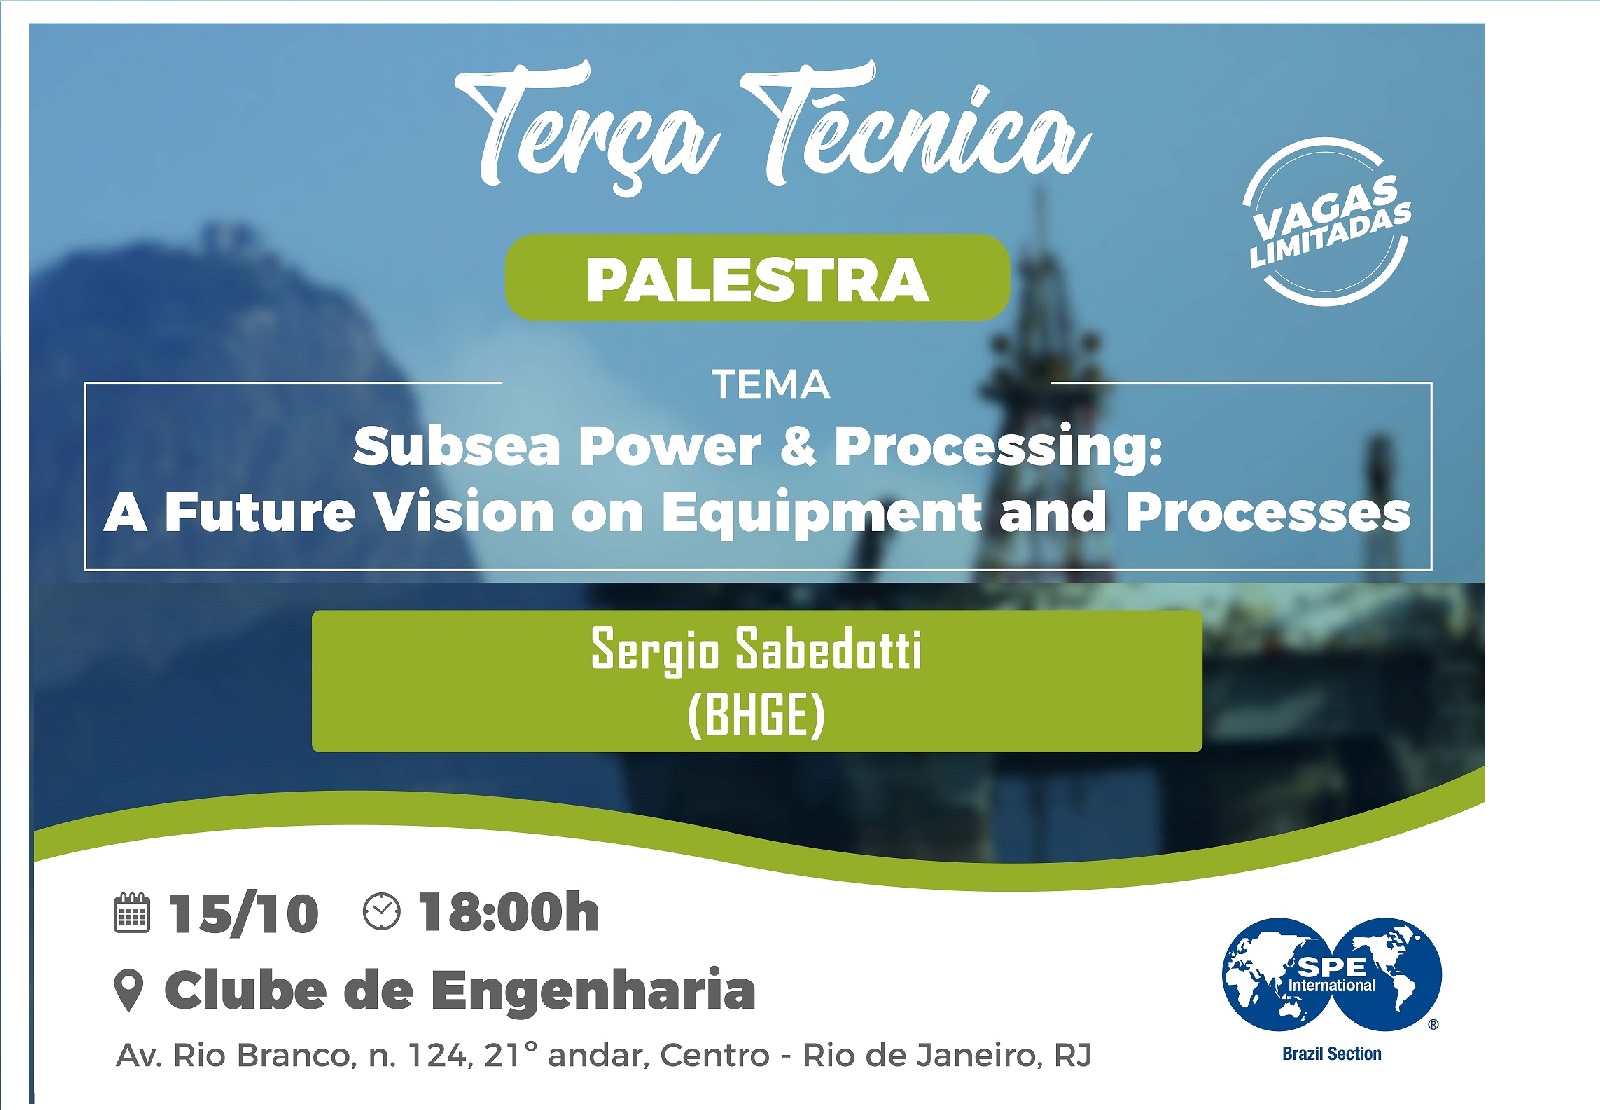 Terça Técnica: “Subsea Power & Processing – A Future Vision on Equipment and Processes”